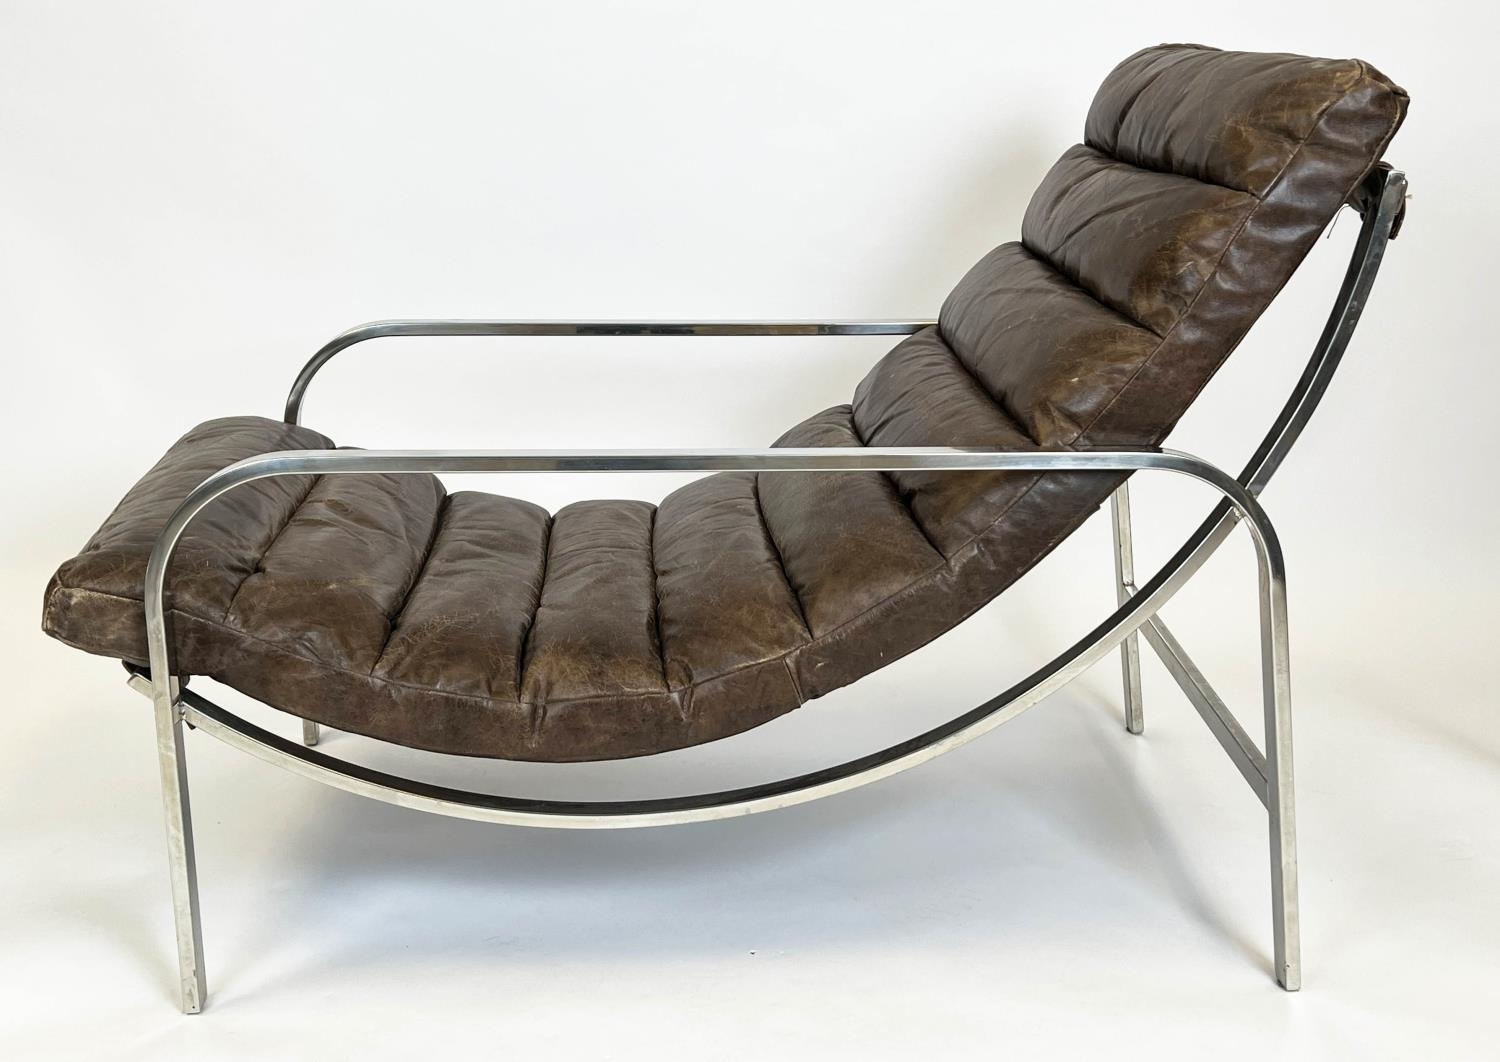 HALO SCOTT ARMCHAIR, ribbed brown leather with a stainless steel frame, 84cm H x 110cm x 63cm. - Image 2 of 4